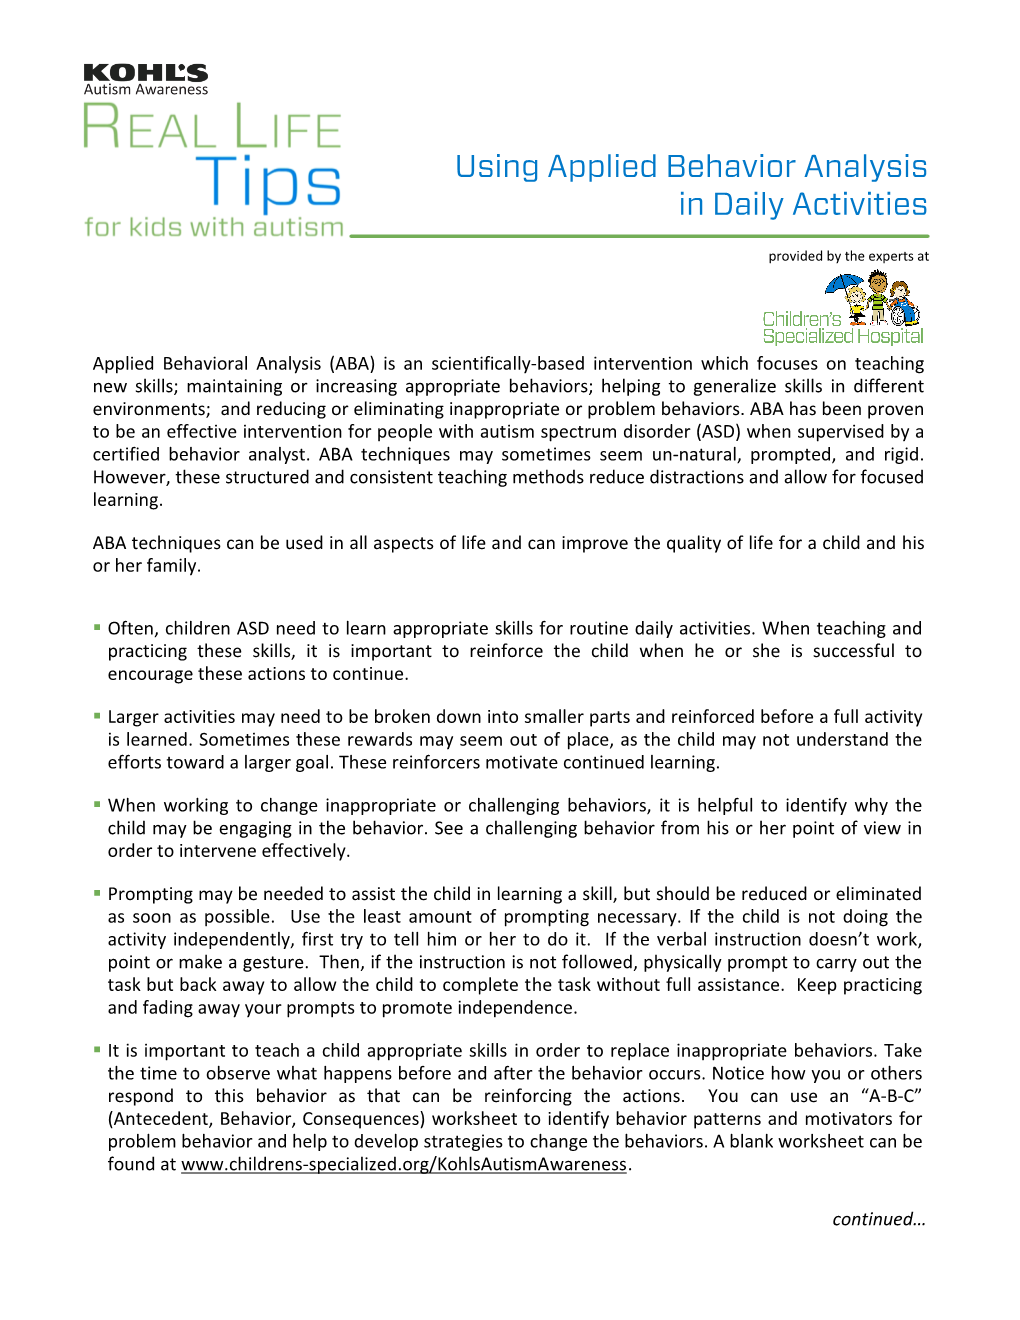 Using Applied Behavior Analysis in Daily Activities